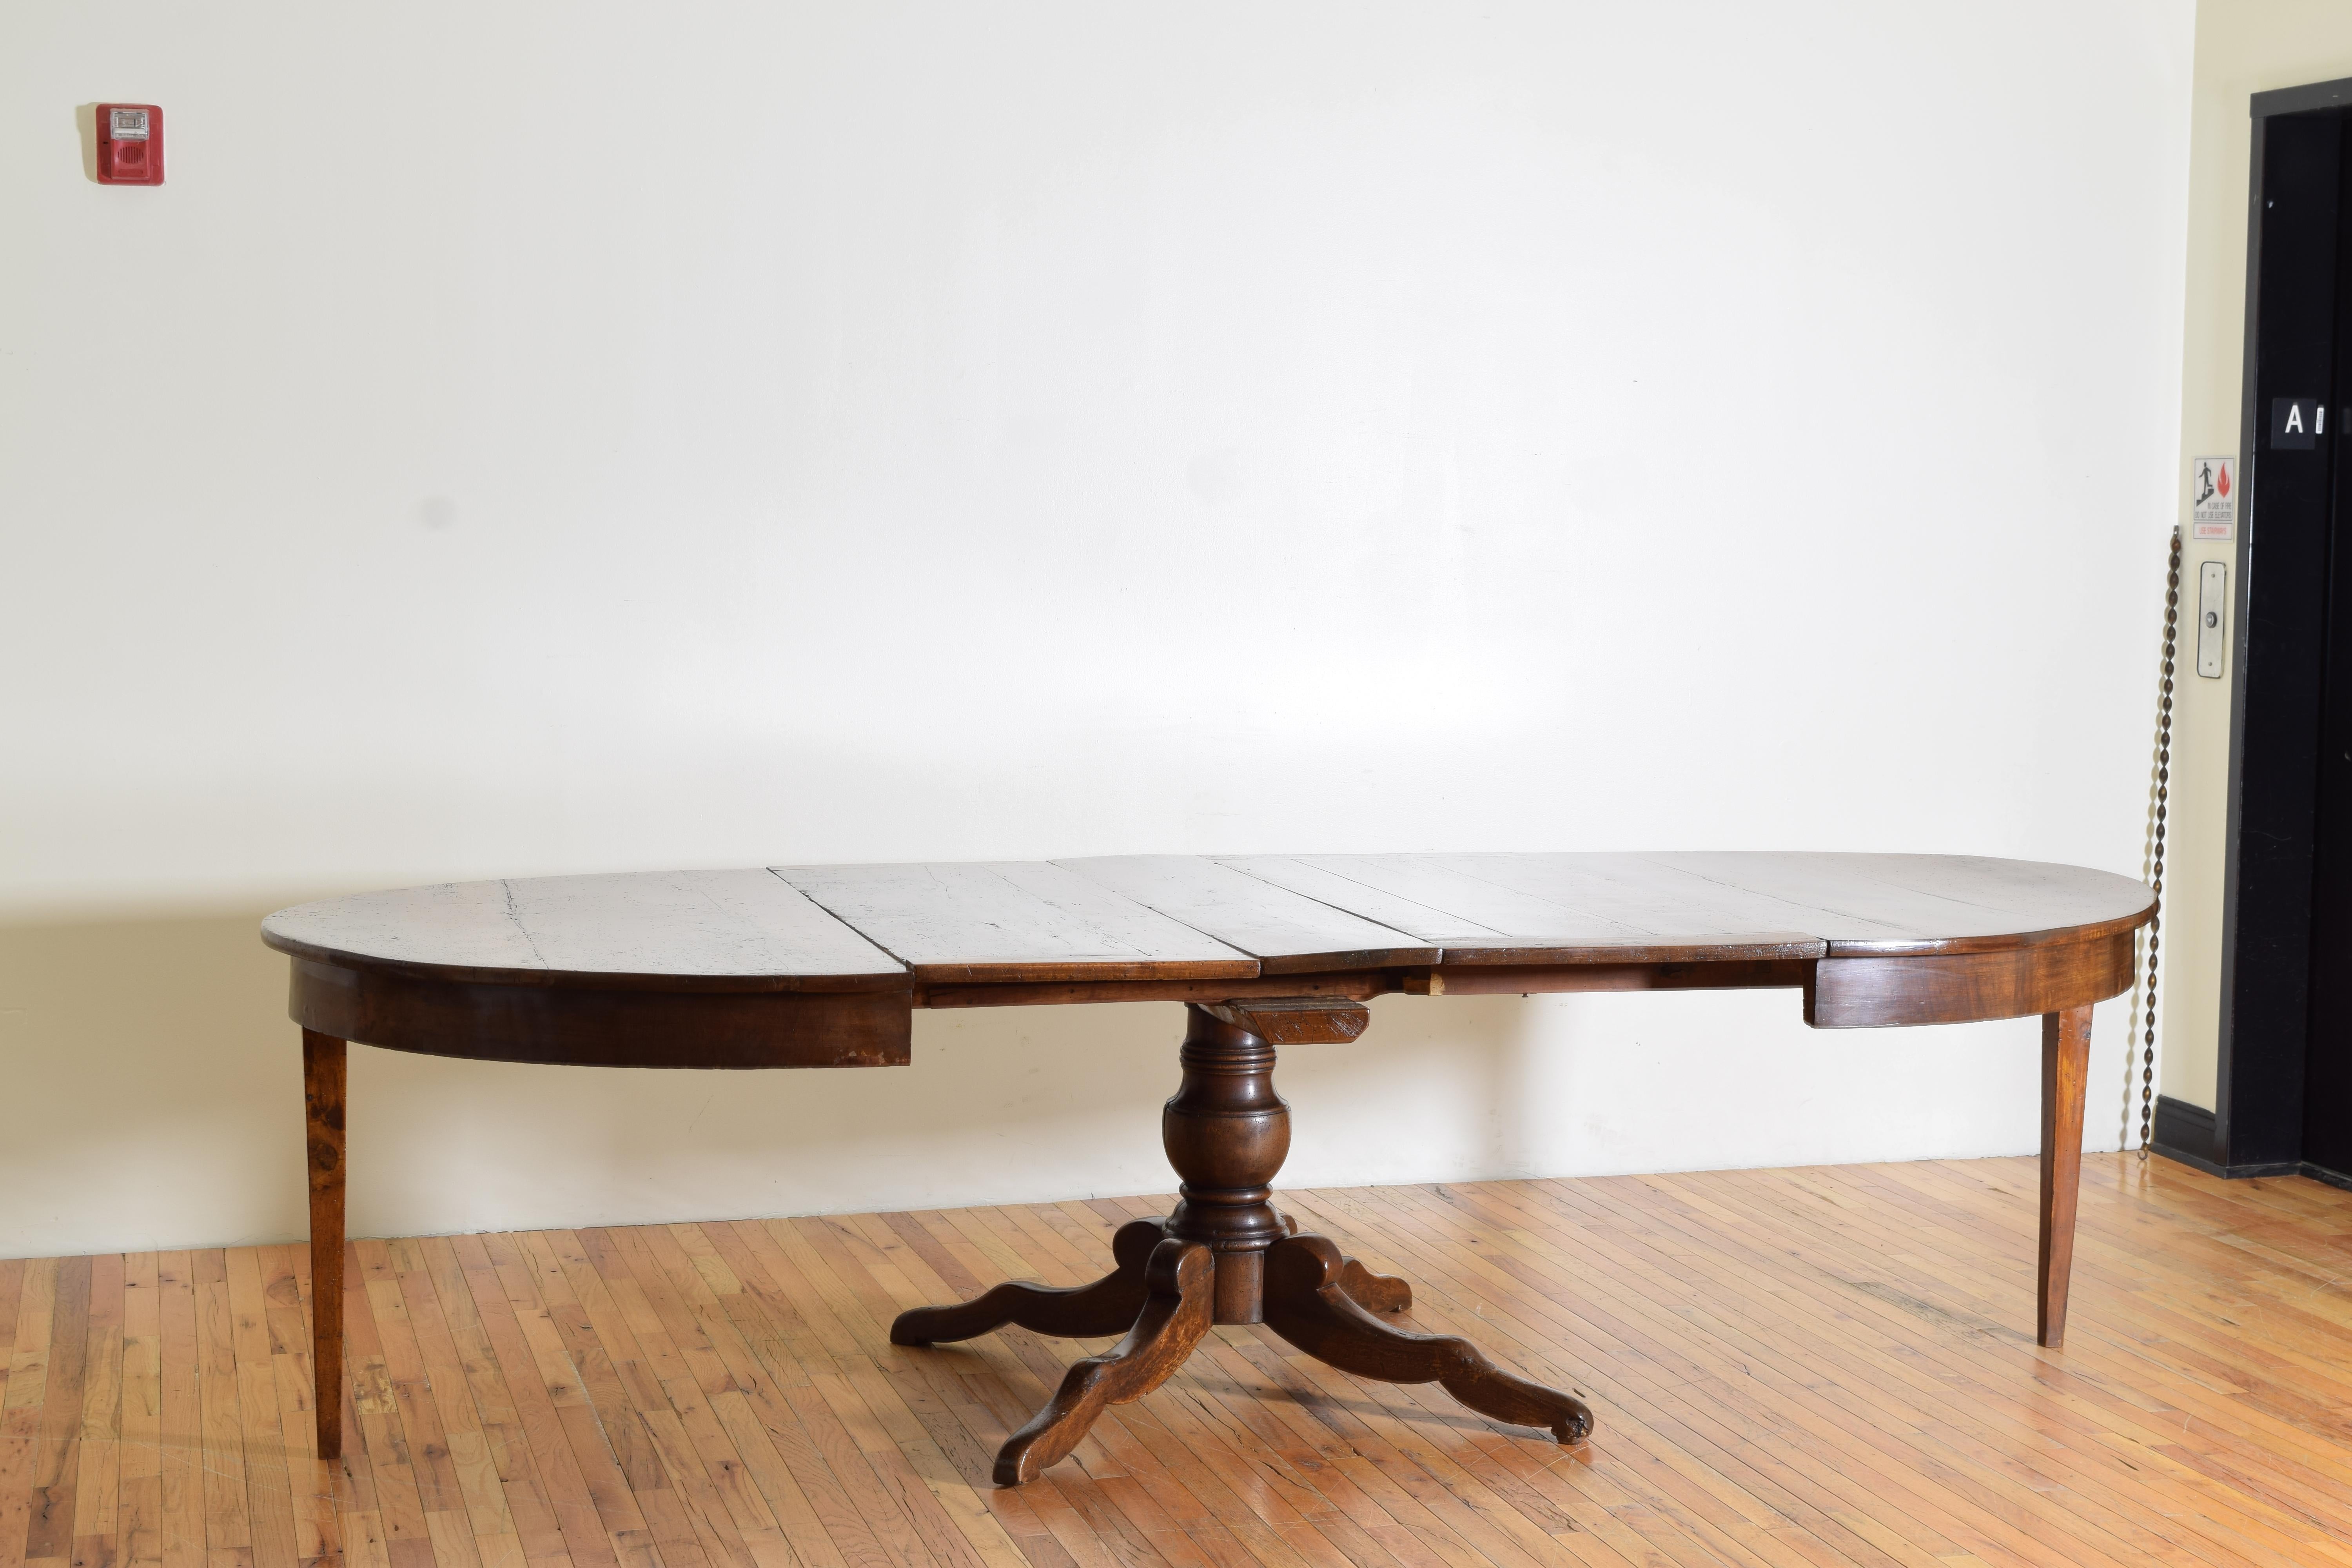 constructed entirely of solid Tuscan walnut and having an elliptical shaped top with a slightly recessed apron, the top opening to accept leaves.  As photographed with two of its three original leaves of 17